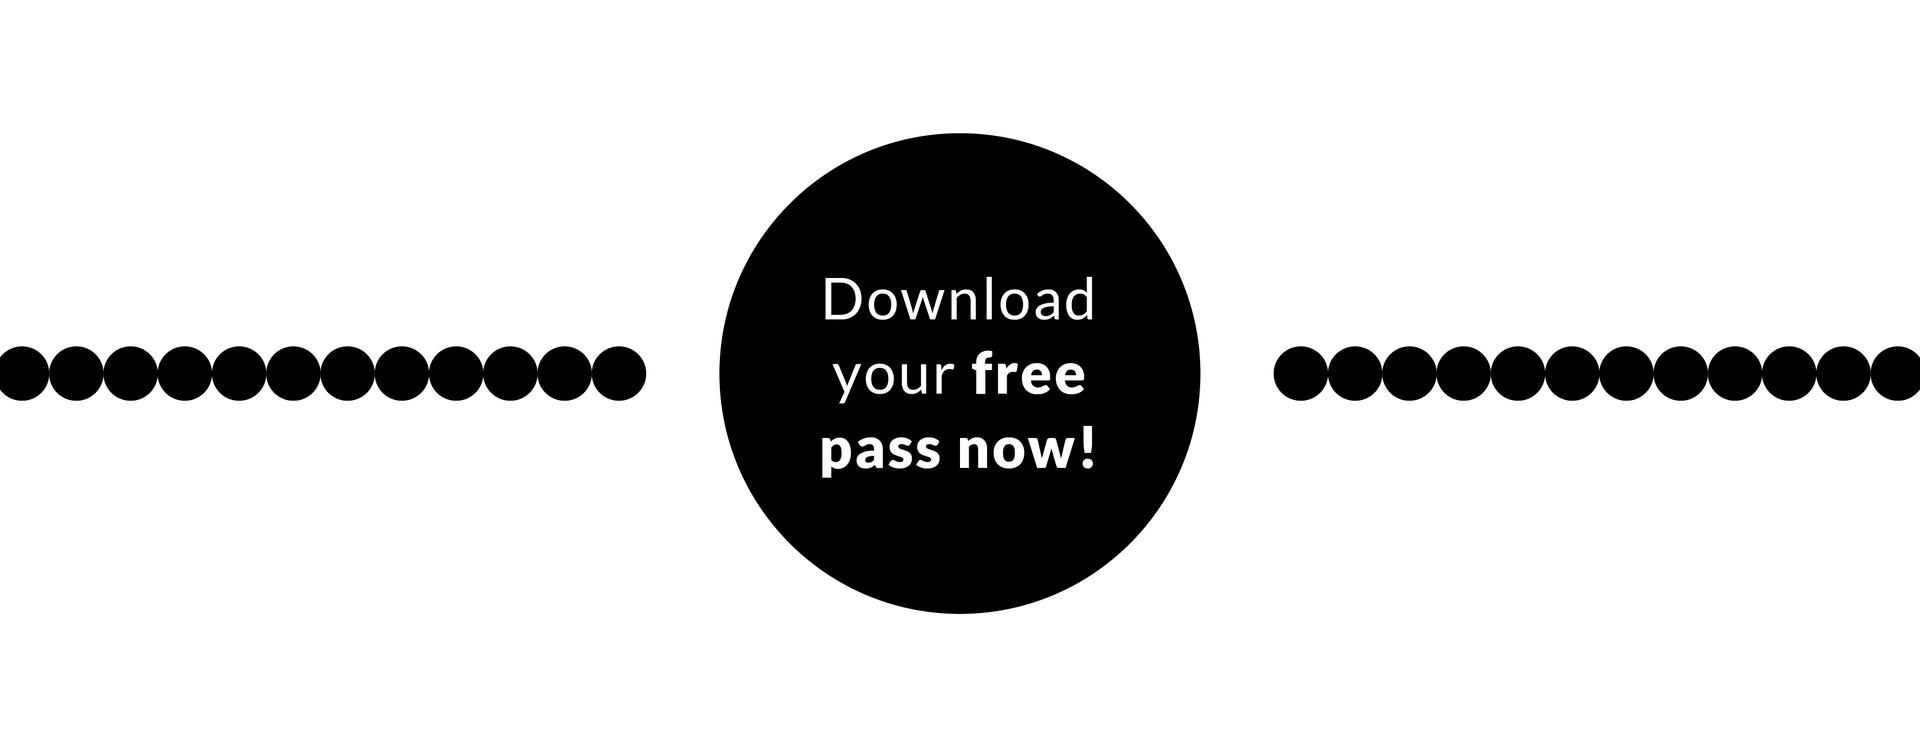 Download your free pass now!